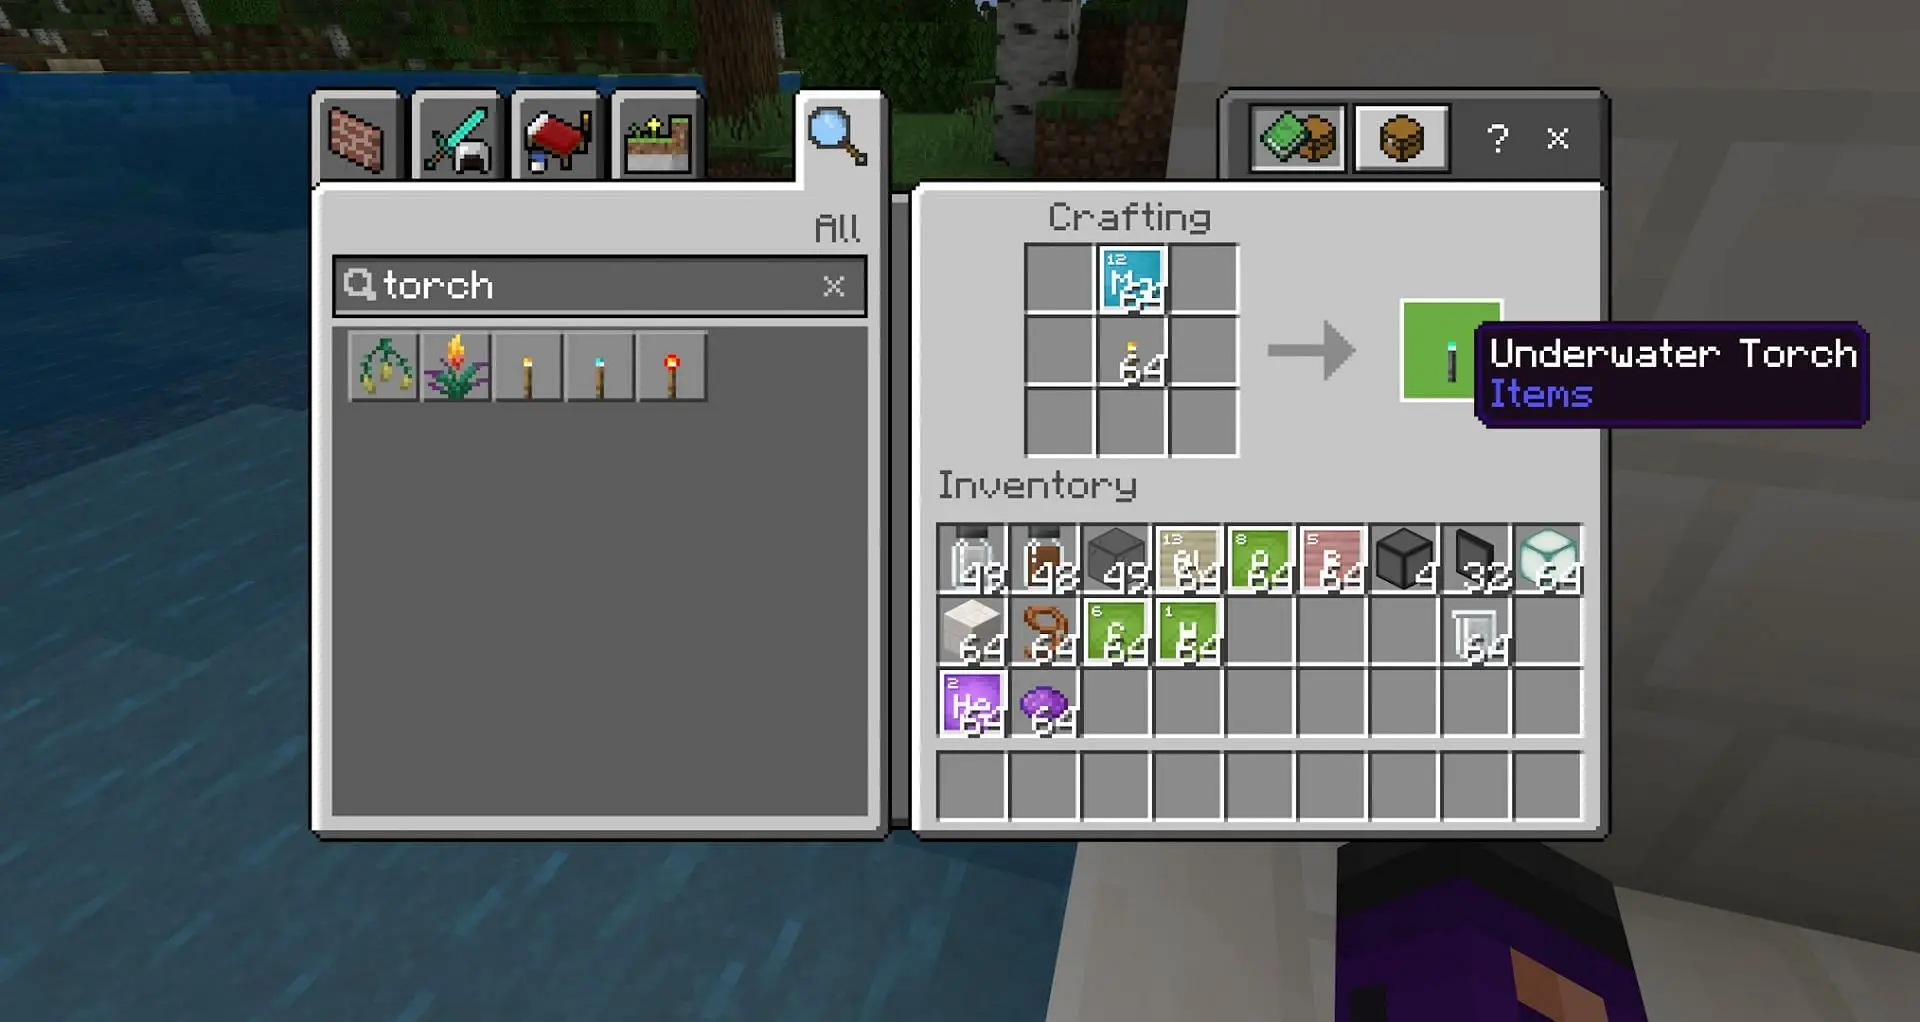 The recipe for underwater torches (Image via Mojang)